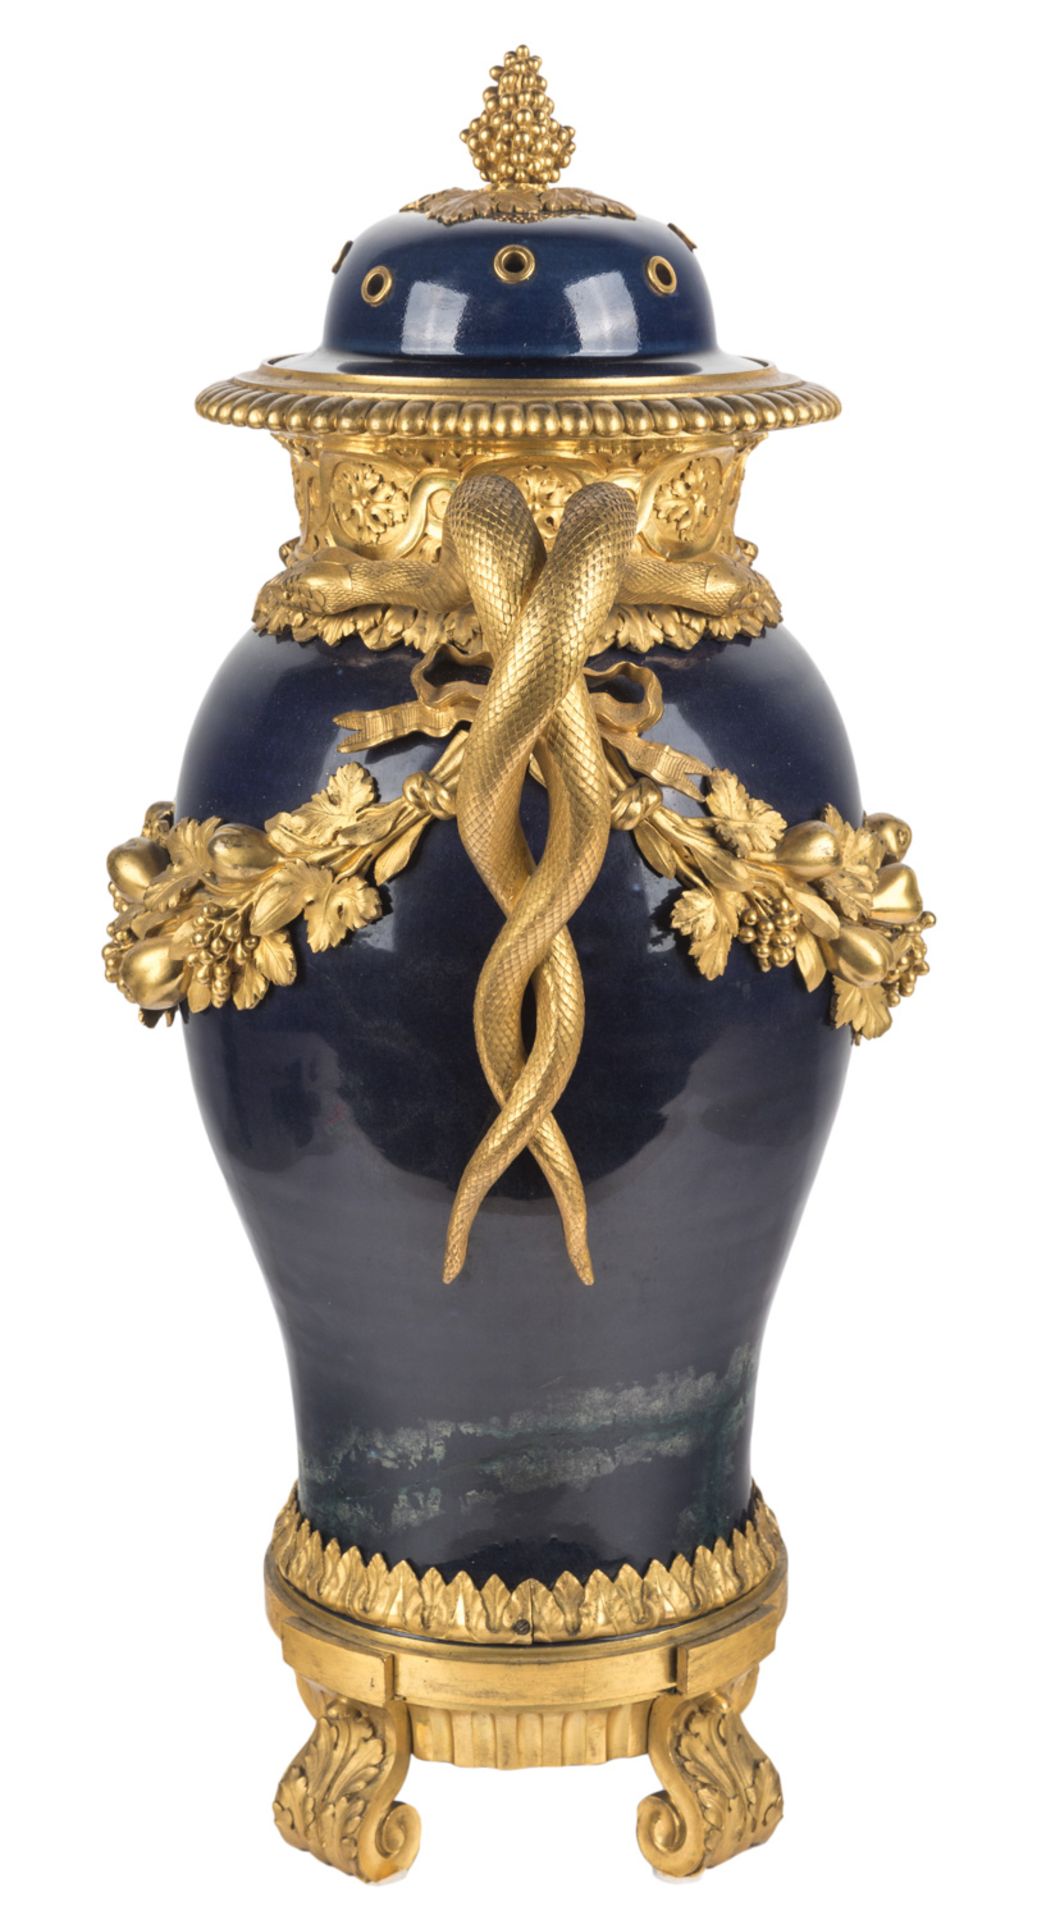 A LOUIS XV/XVI ORMOLU-MOUNTED CHINESE PORCELAIN VASE, WITH LATER SNAKE HANDLES, QIANLONG PERIOD - Image 2 of 2